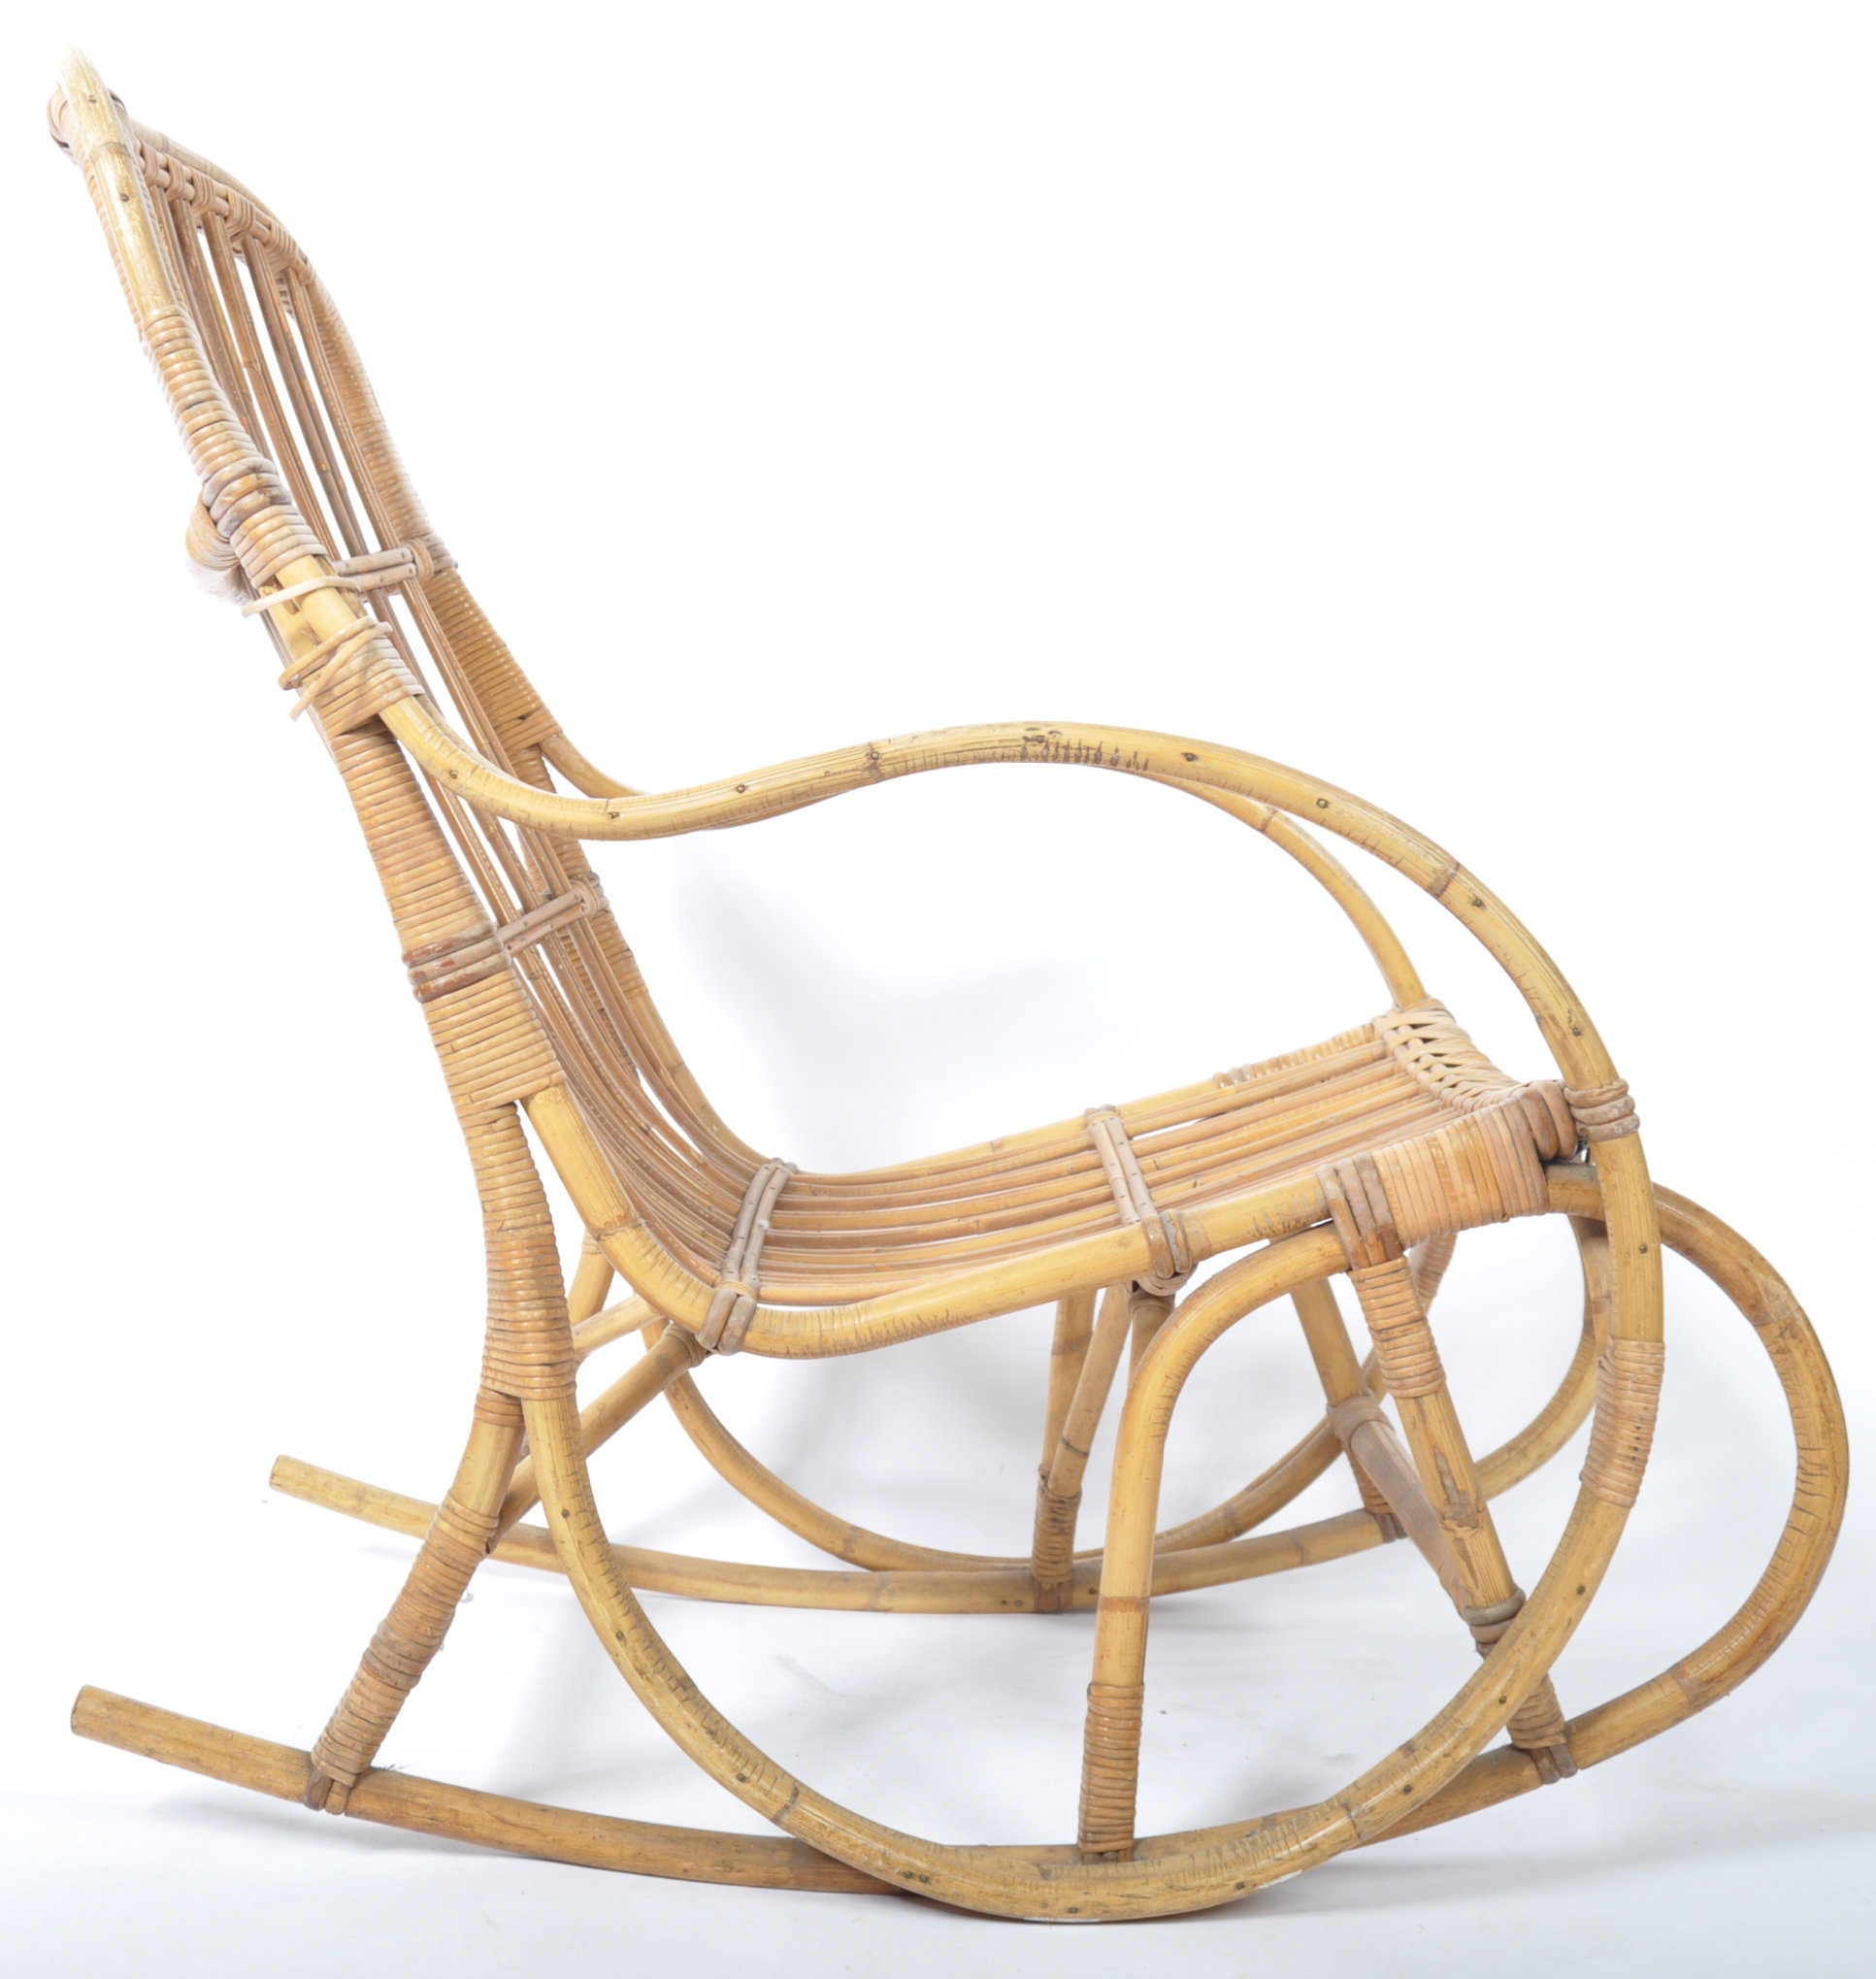 ANGRAVE'S OF LEICESTER CANE WORK "INVINCIBLE" ROCKING CHAIR - Image 8 of 9